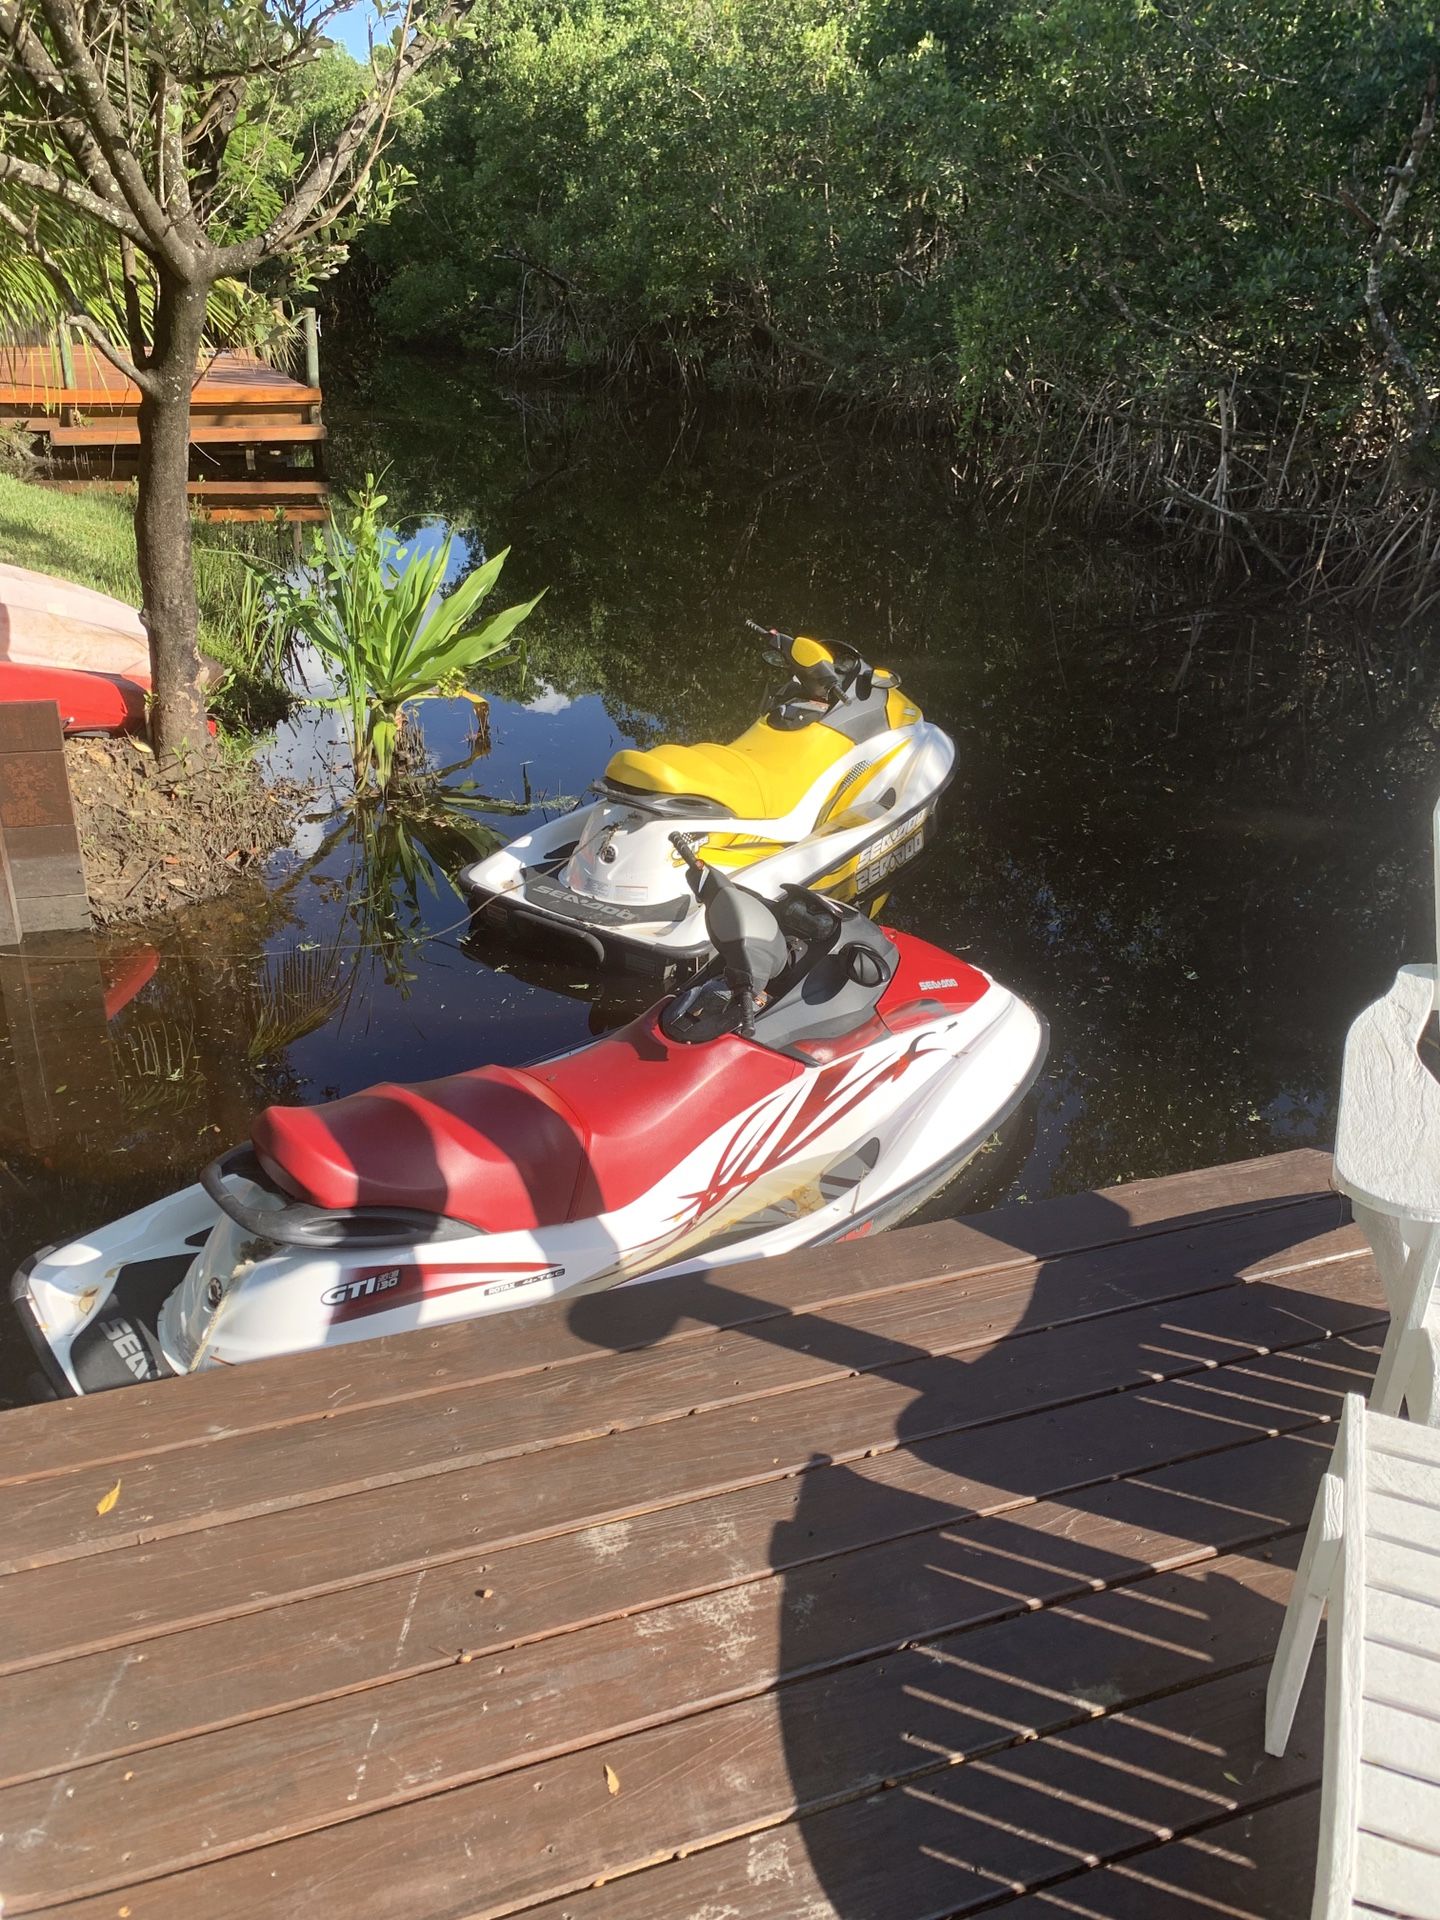 2007=2008 Seadoo GTI GTX Jet skis With Trailor Low Hrs 175 Covers Ready To Ride Will Trade For Truck Van Su 